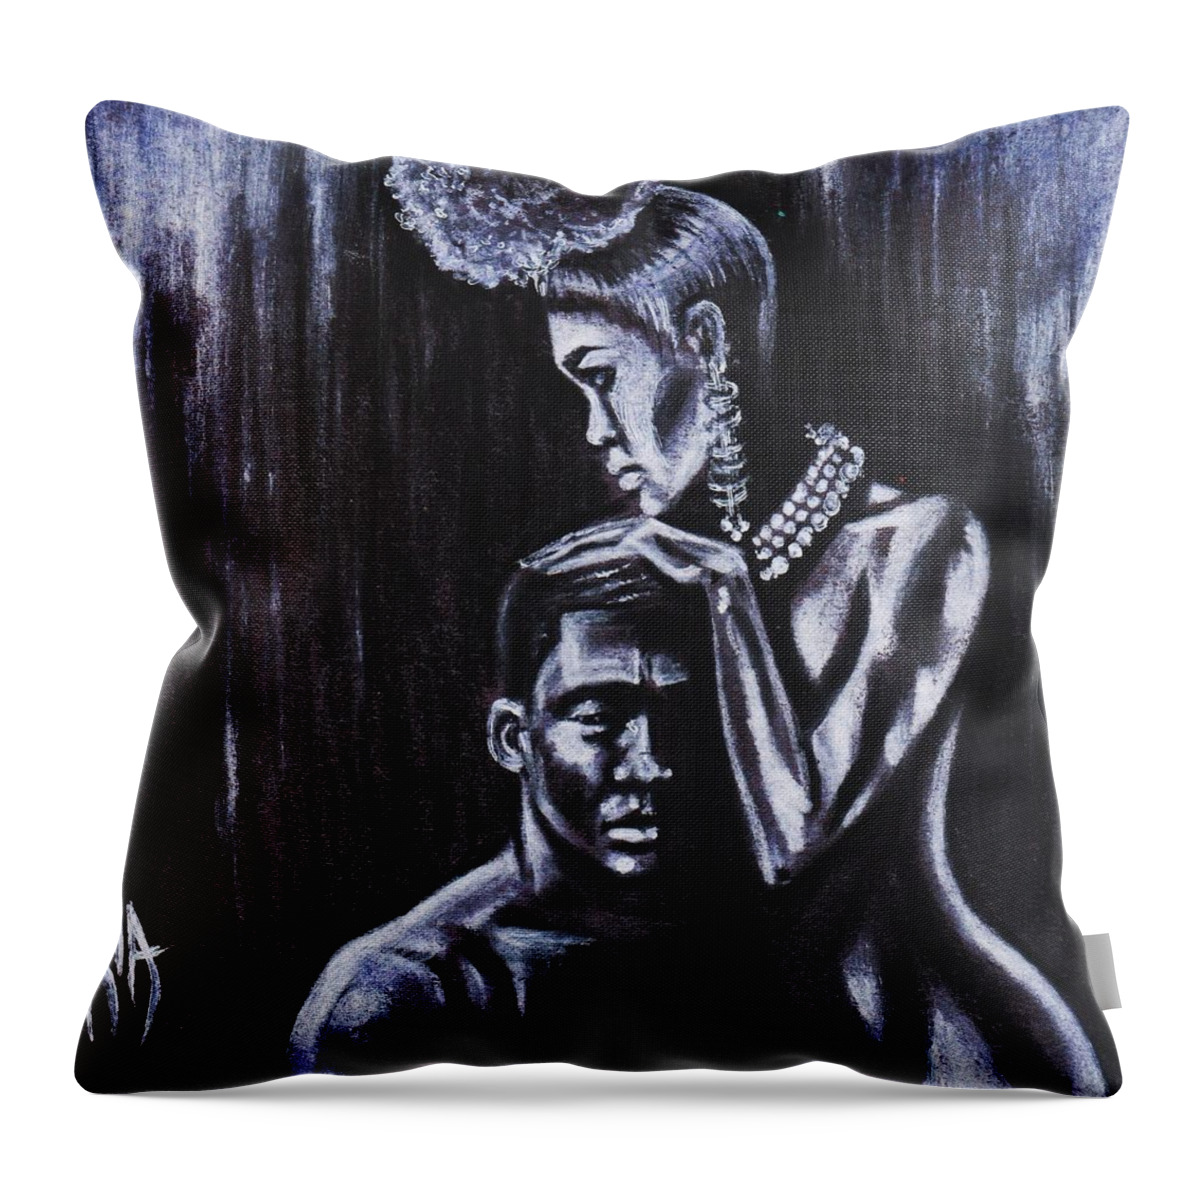 Artbyria Throw Pillow featuring the photograph Inseparable by Artist RiA